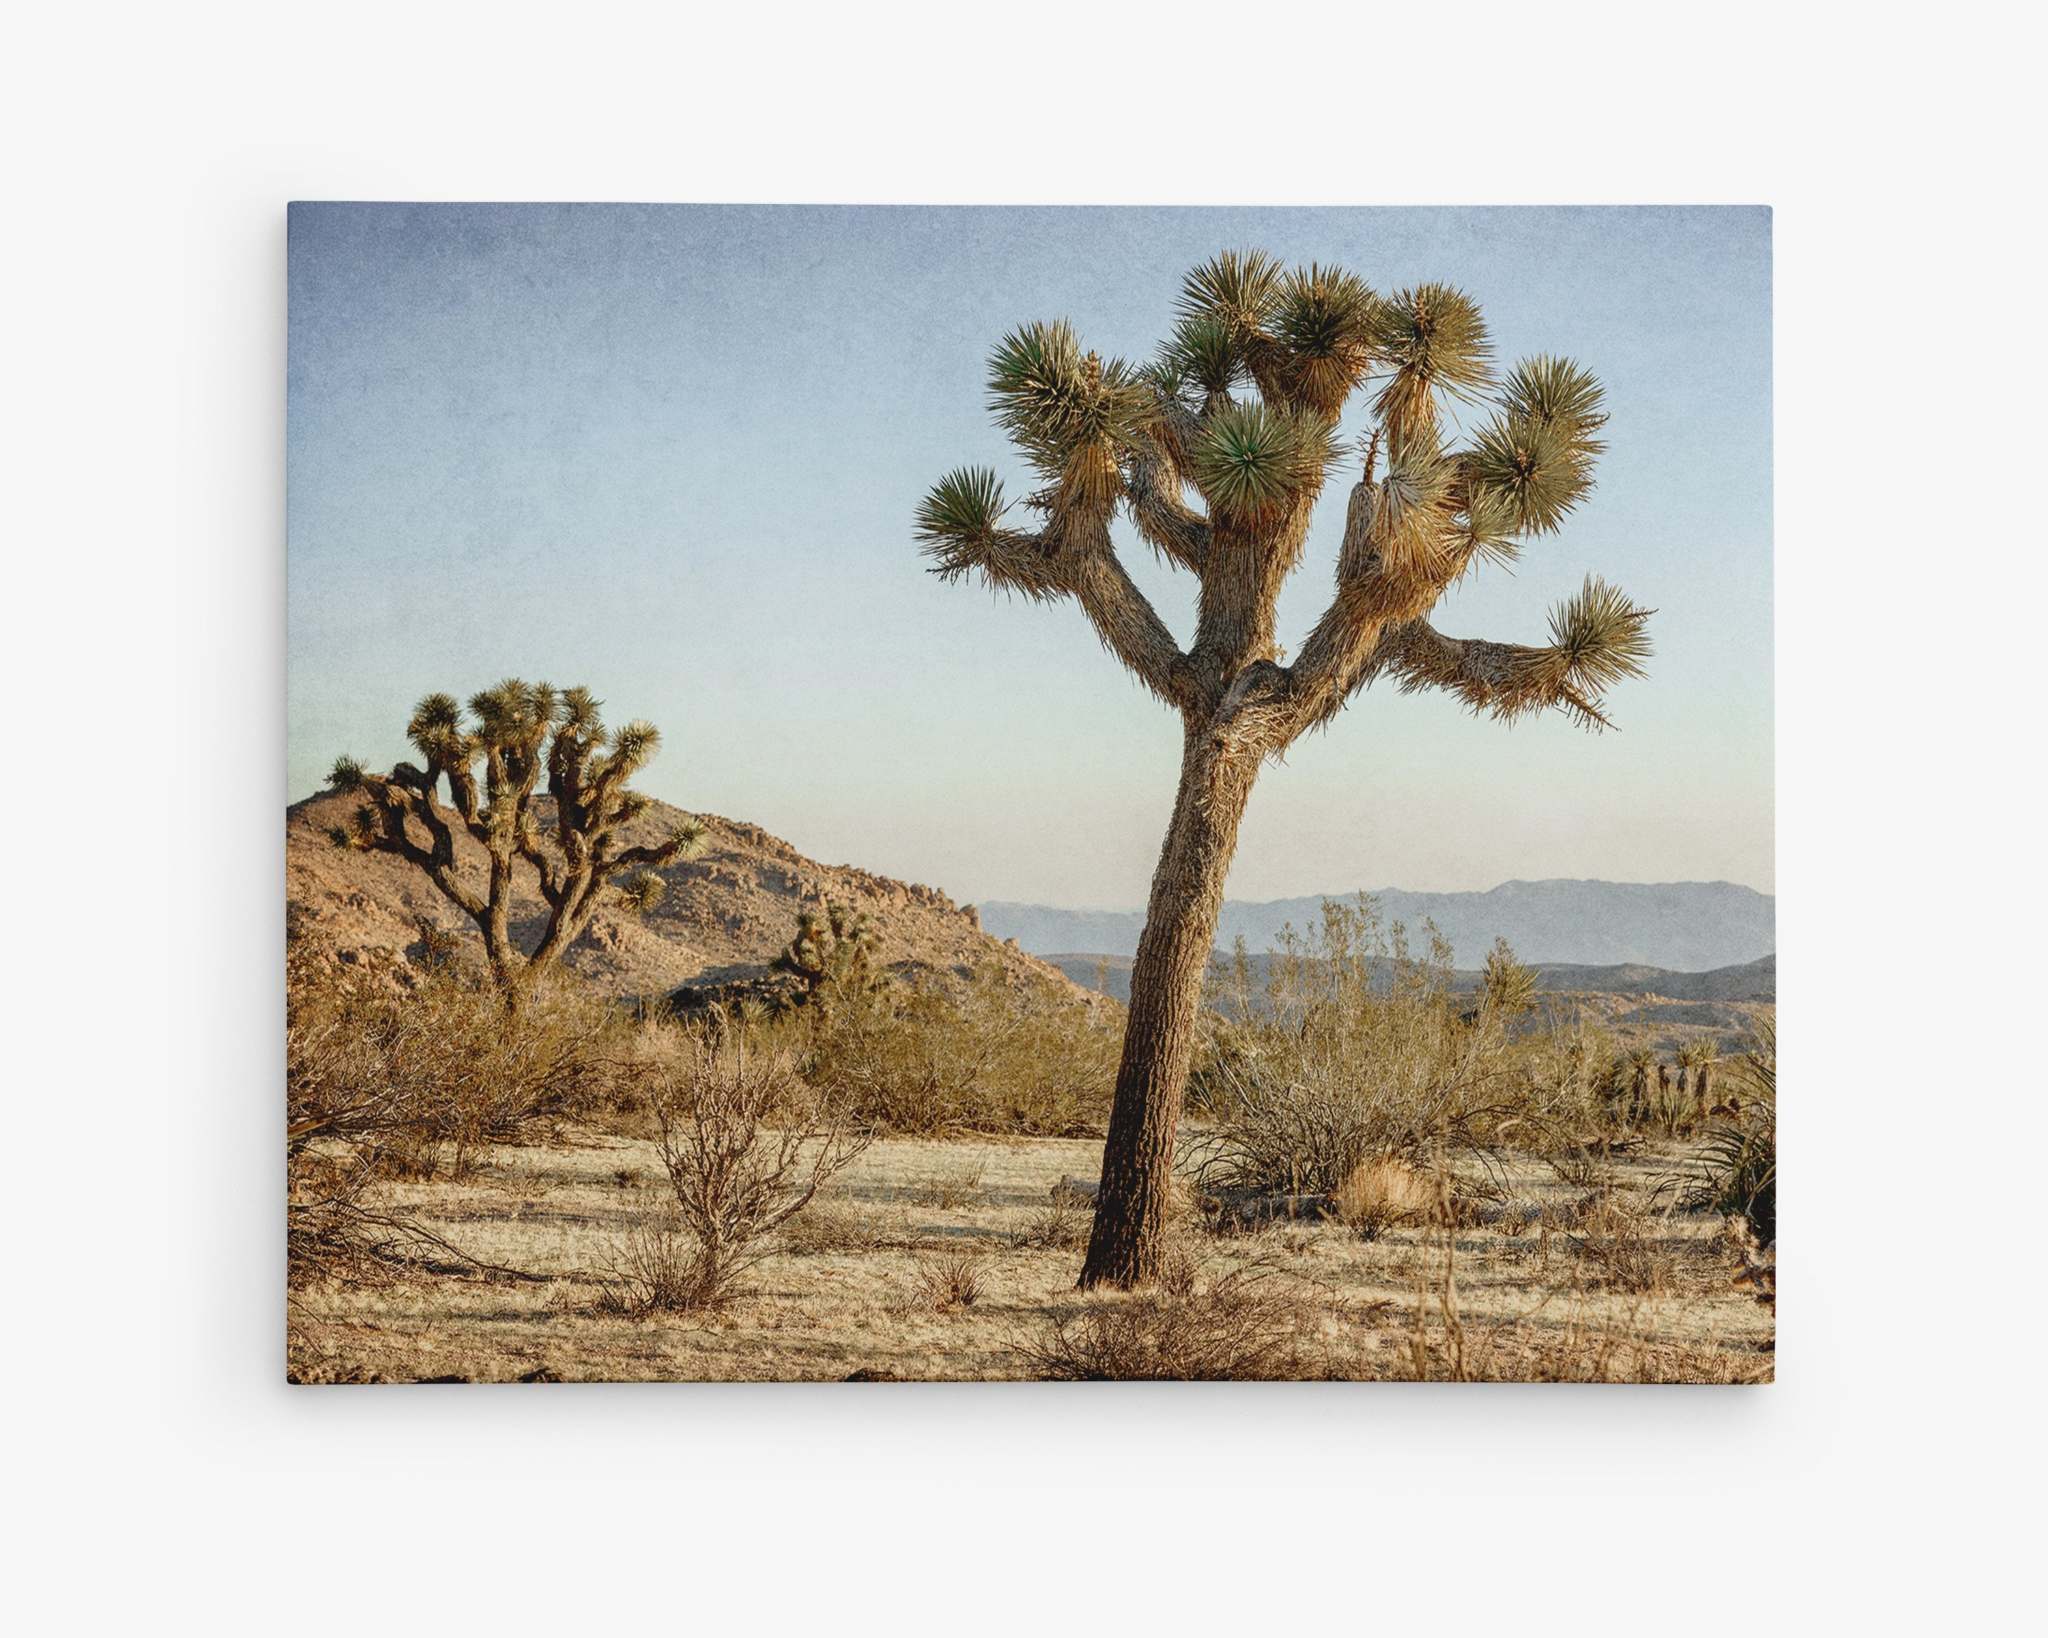 A scenic view of Joshua Tree National Park shows a prominent Joshua tree in the foreground with more Joshua trees and desert vegetation spread across a hilly landscape. The sky is clear and blue, and mountains are visible in the distance under soft sunlight, creating a perfect Offley Green Joshua Tree Canvas Wall Art, 'Mighty Joshua' for any Palm Springs art lover.